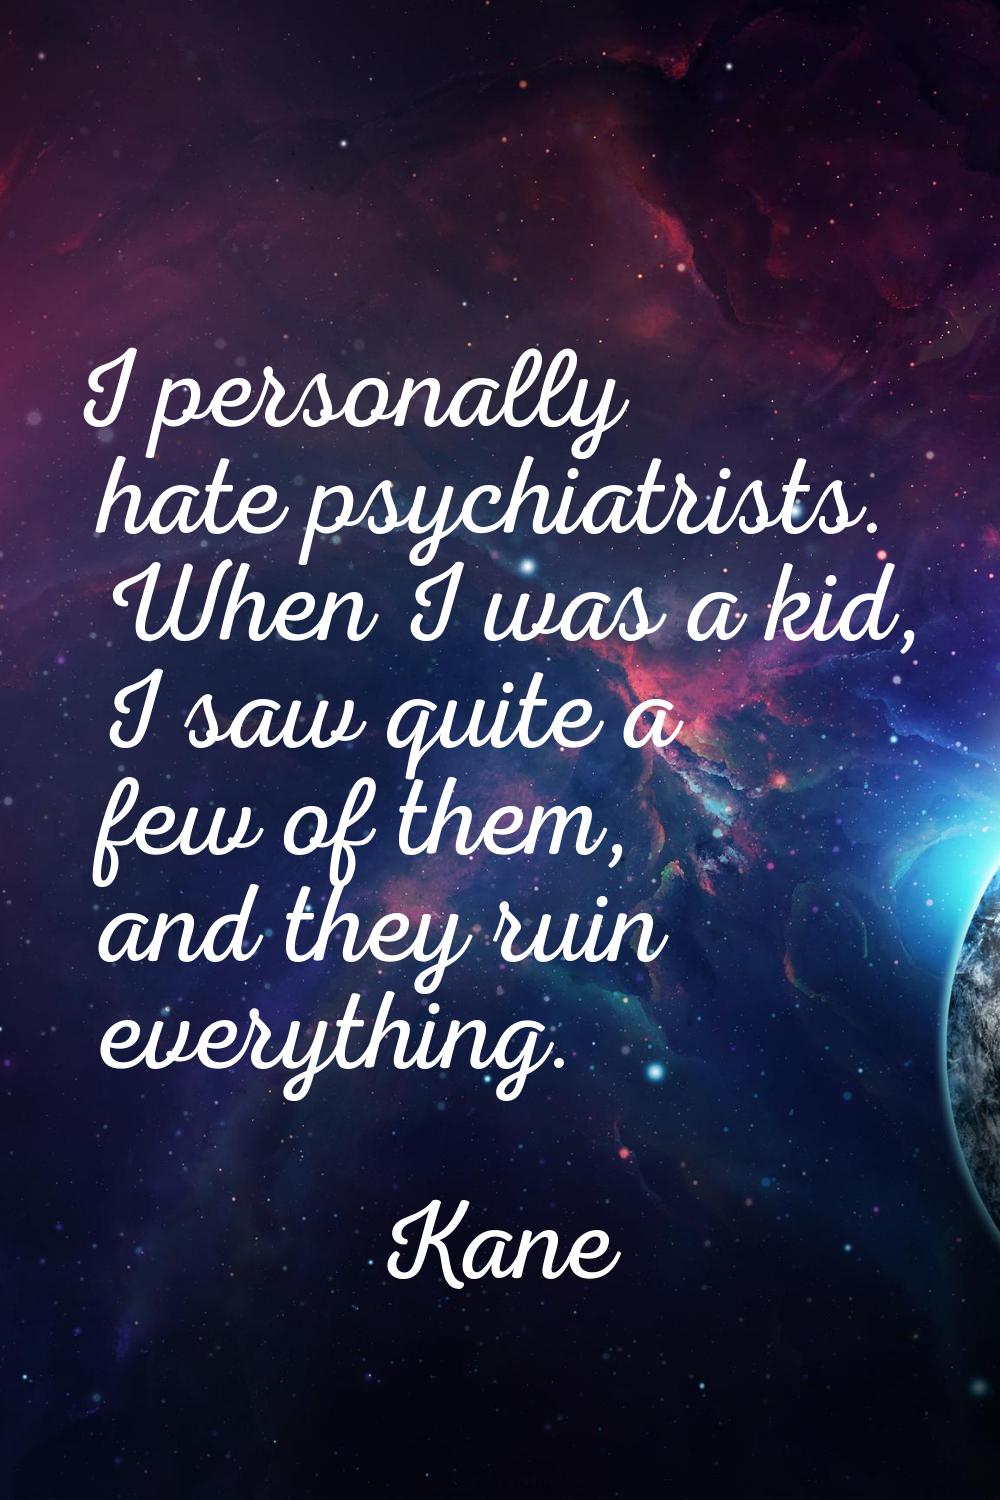 I personally hate psychiatrists. When I was a kid, I saw quite a few of them, and they ruin everyth